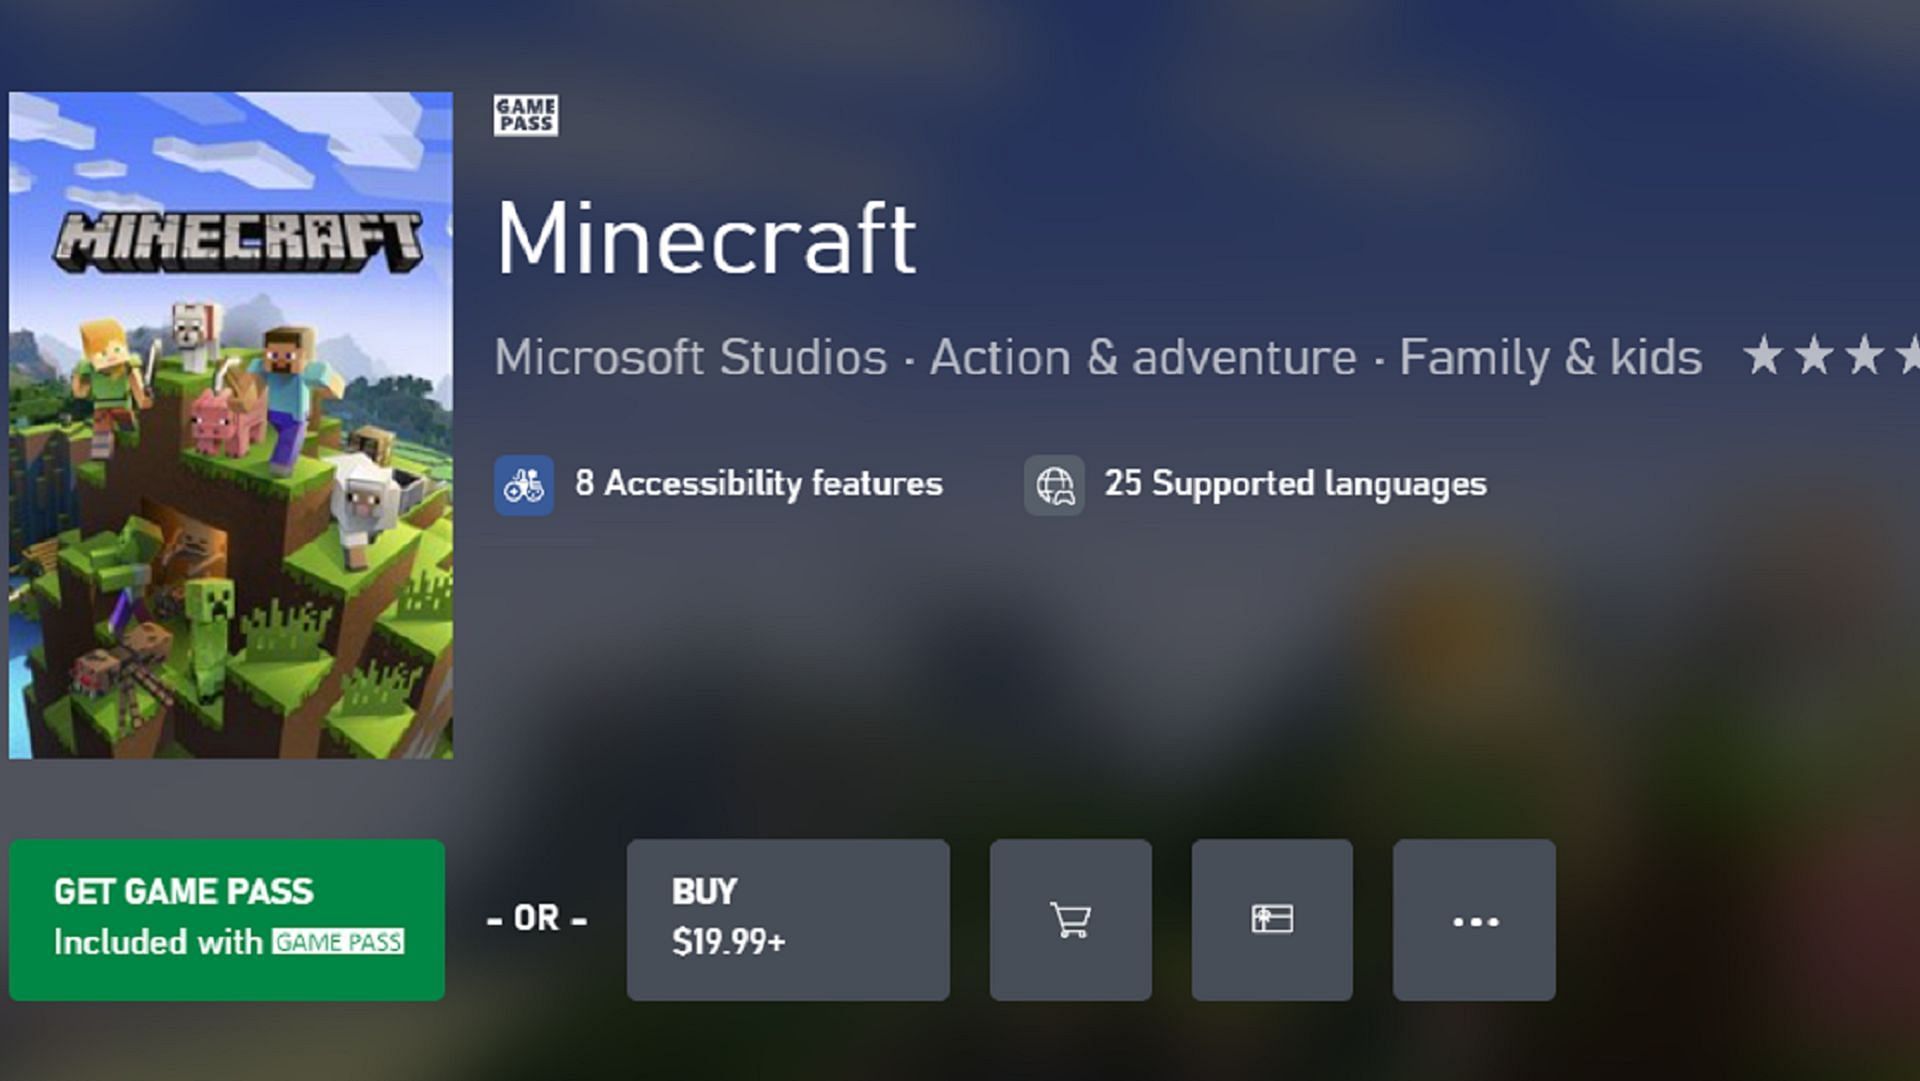 Minecraft 1.20.41.02 Official Download Available on Play Store Now!  (Subscribe!) 